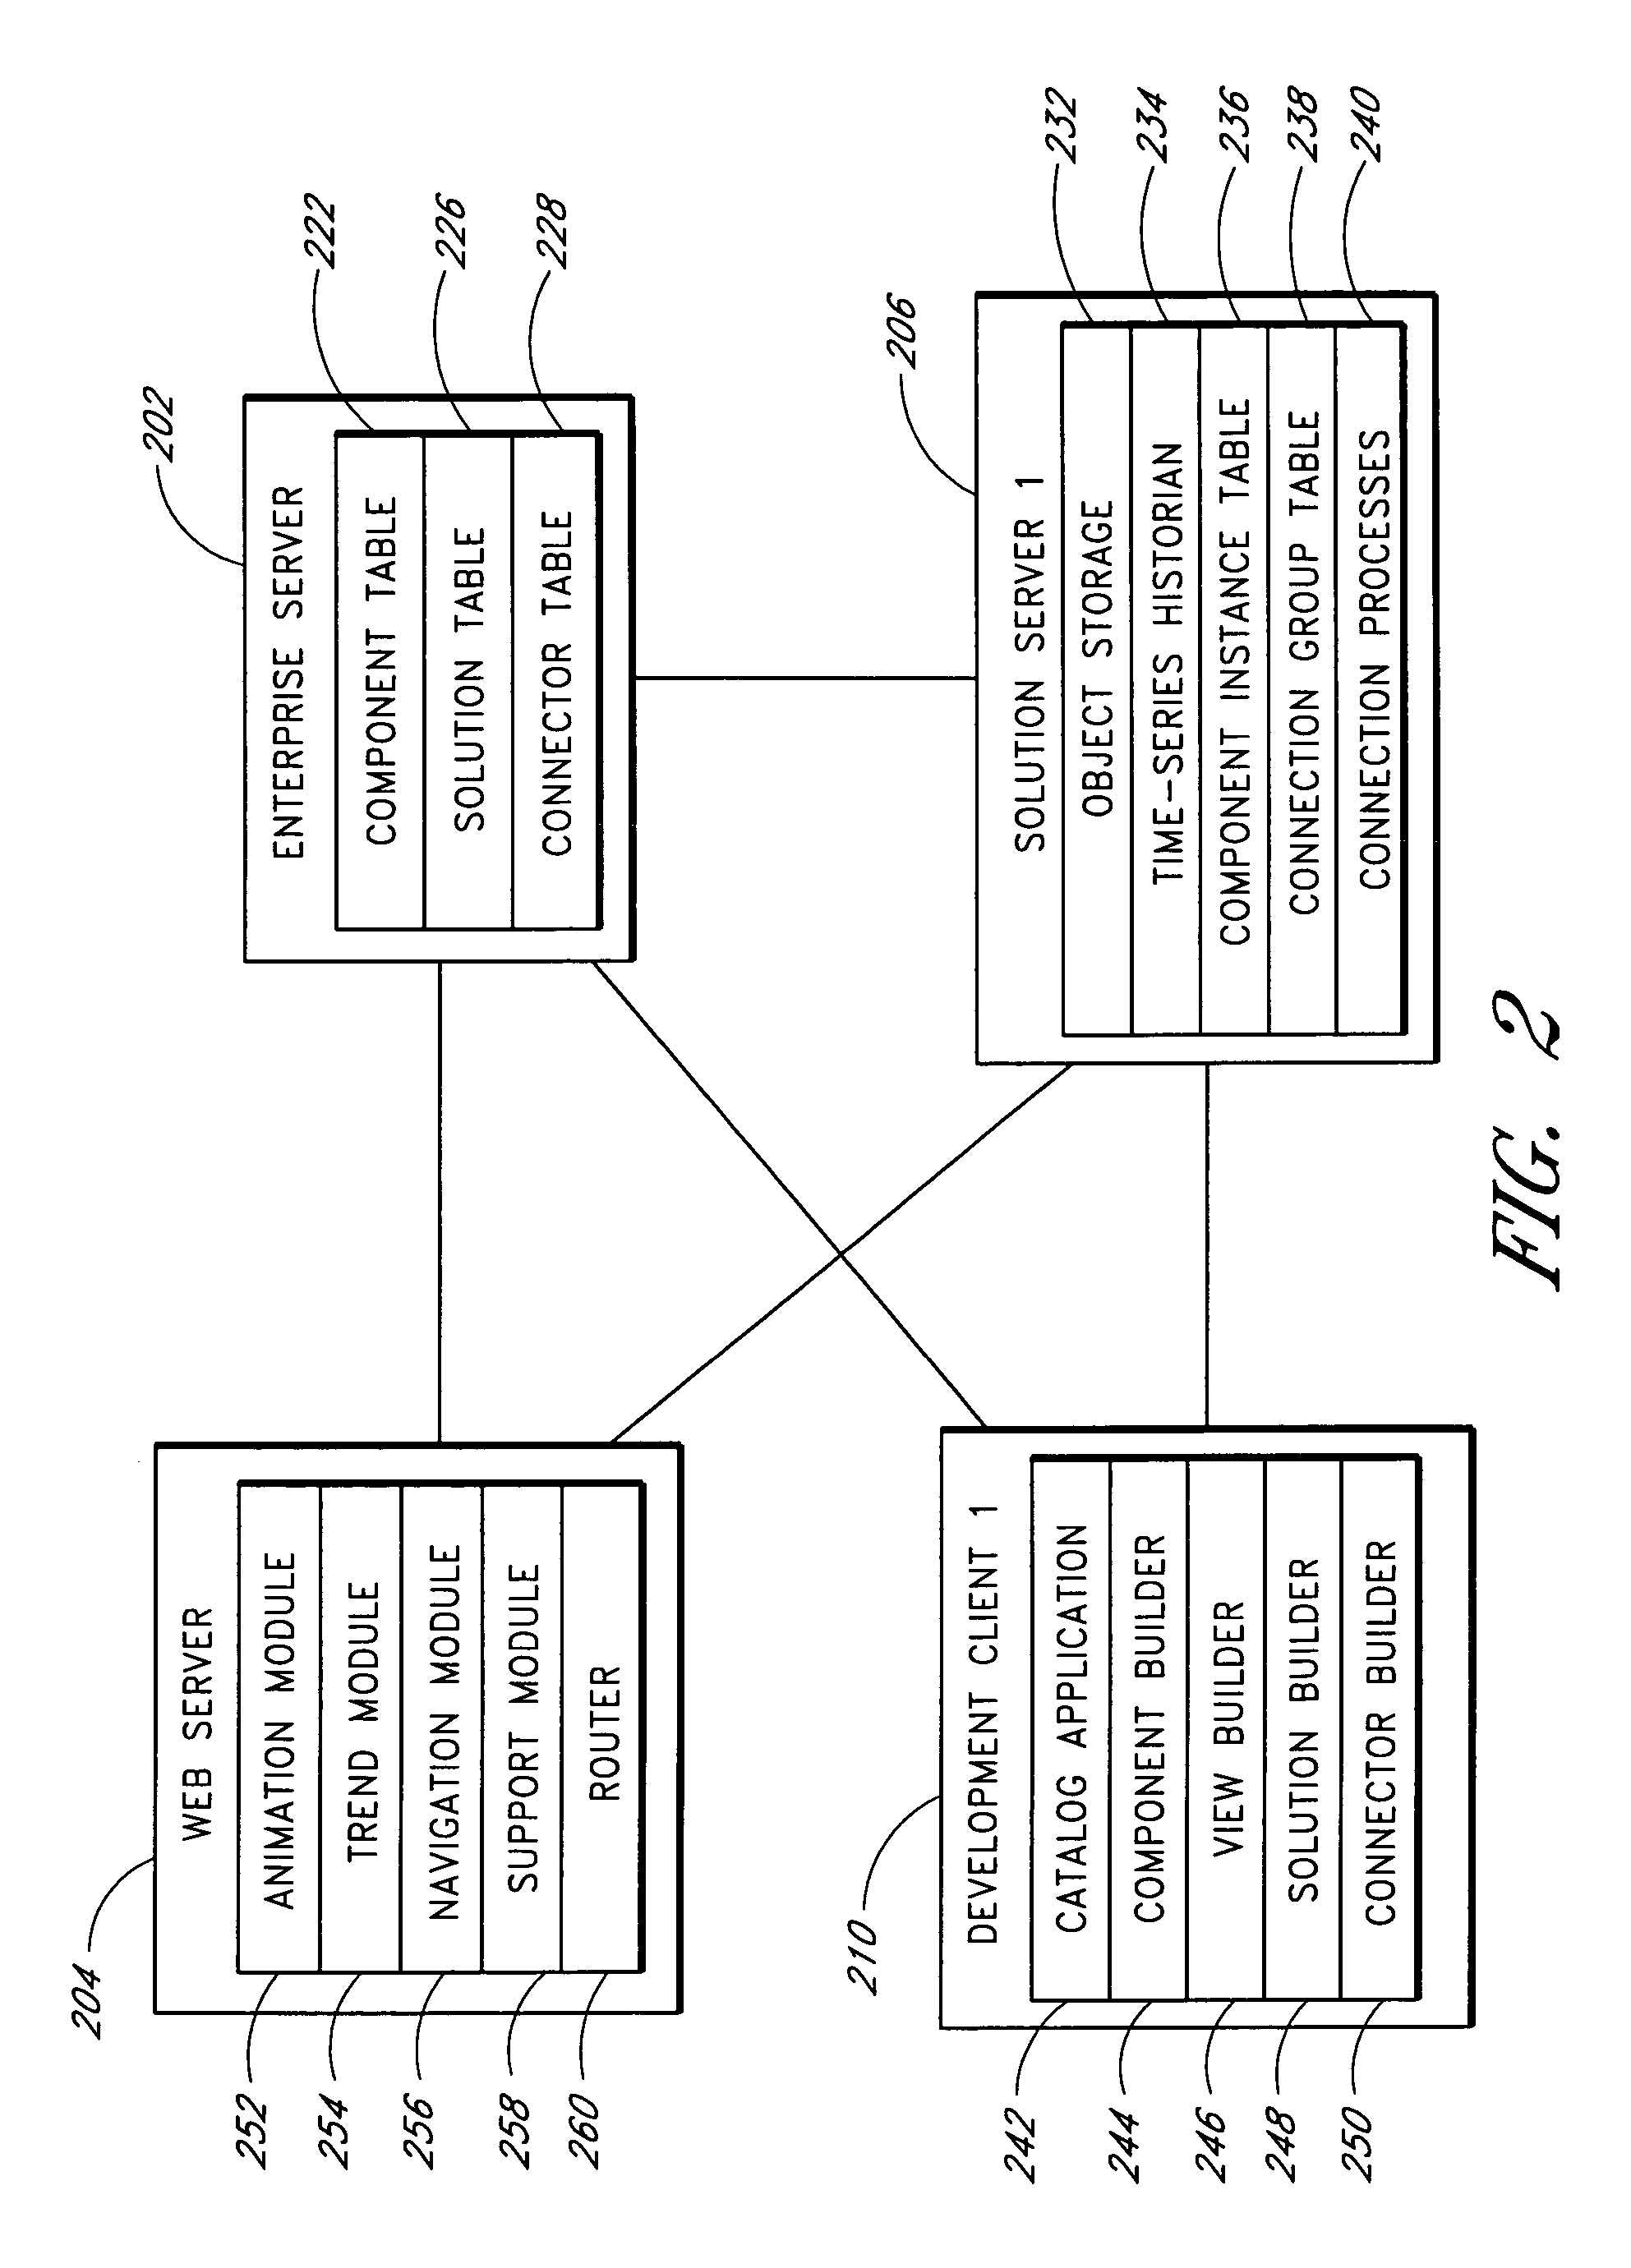 Modeling system for retrieving and displaying data from multiple sources